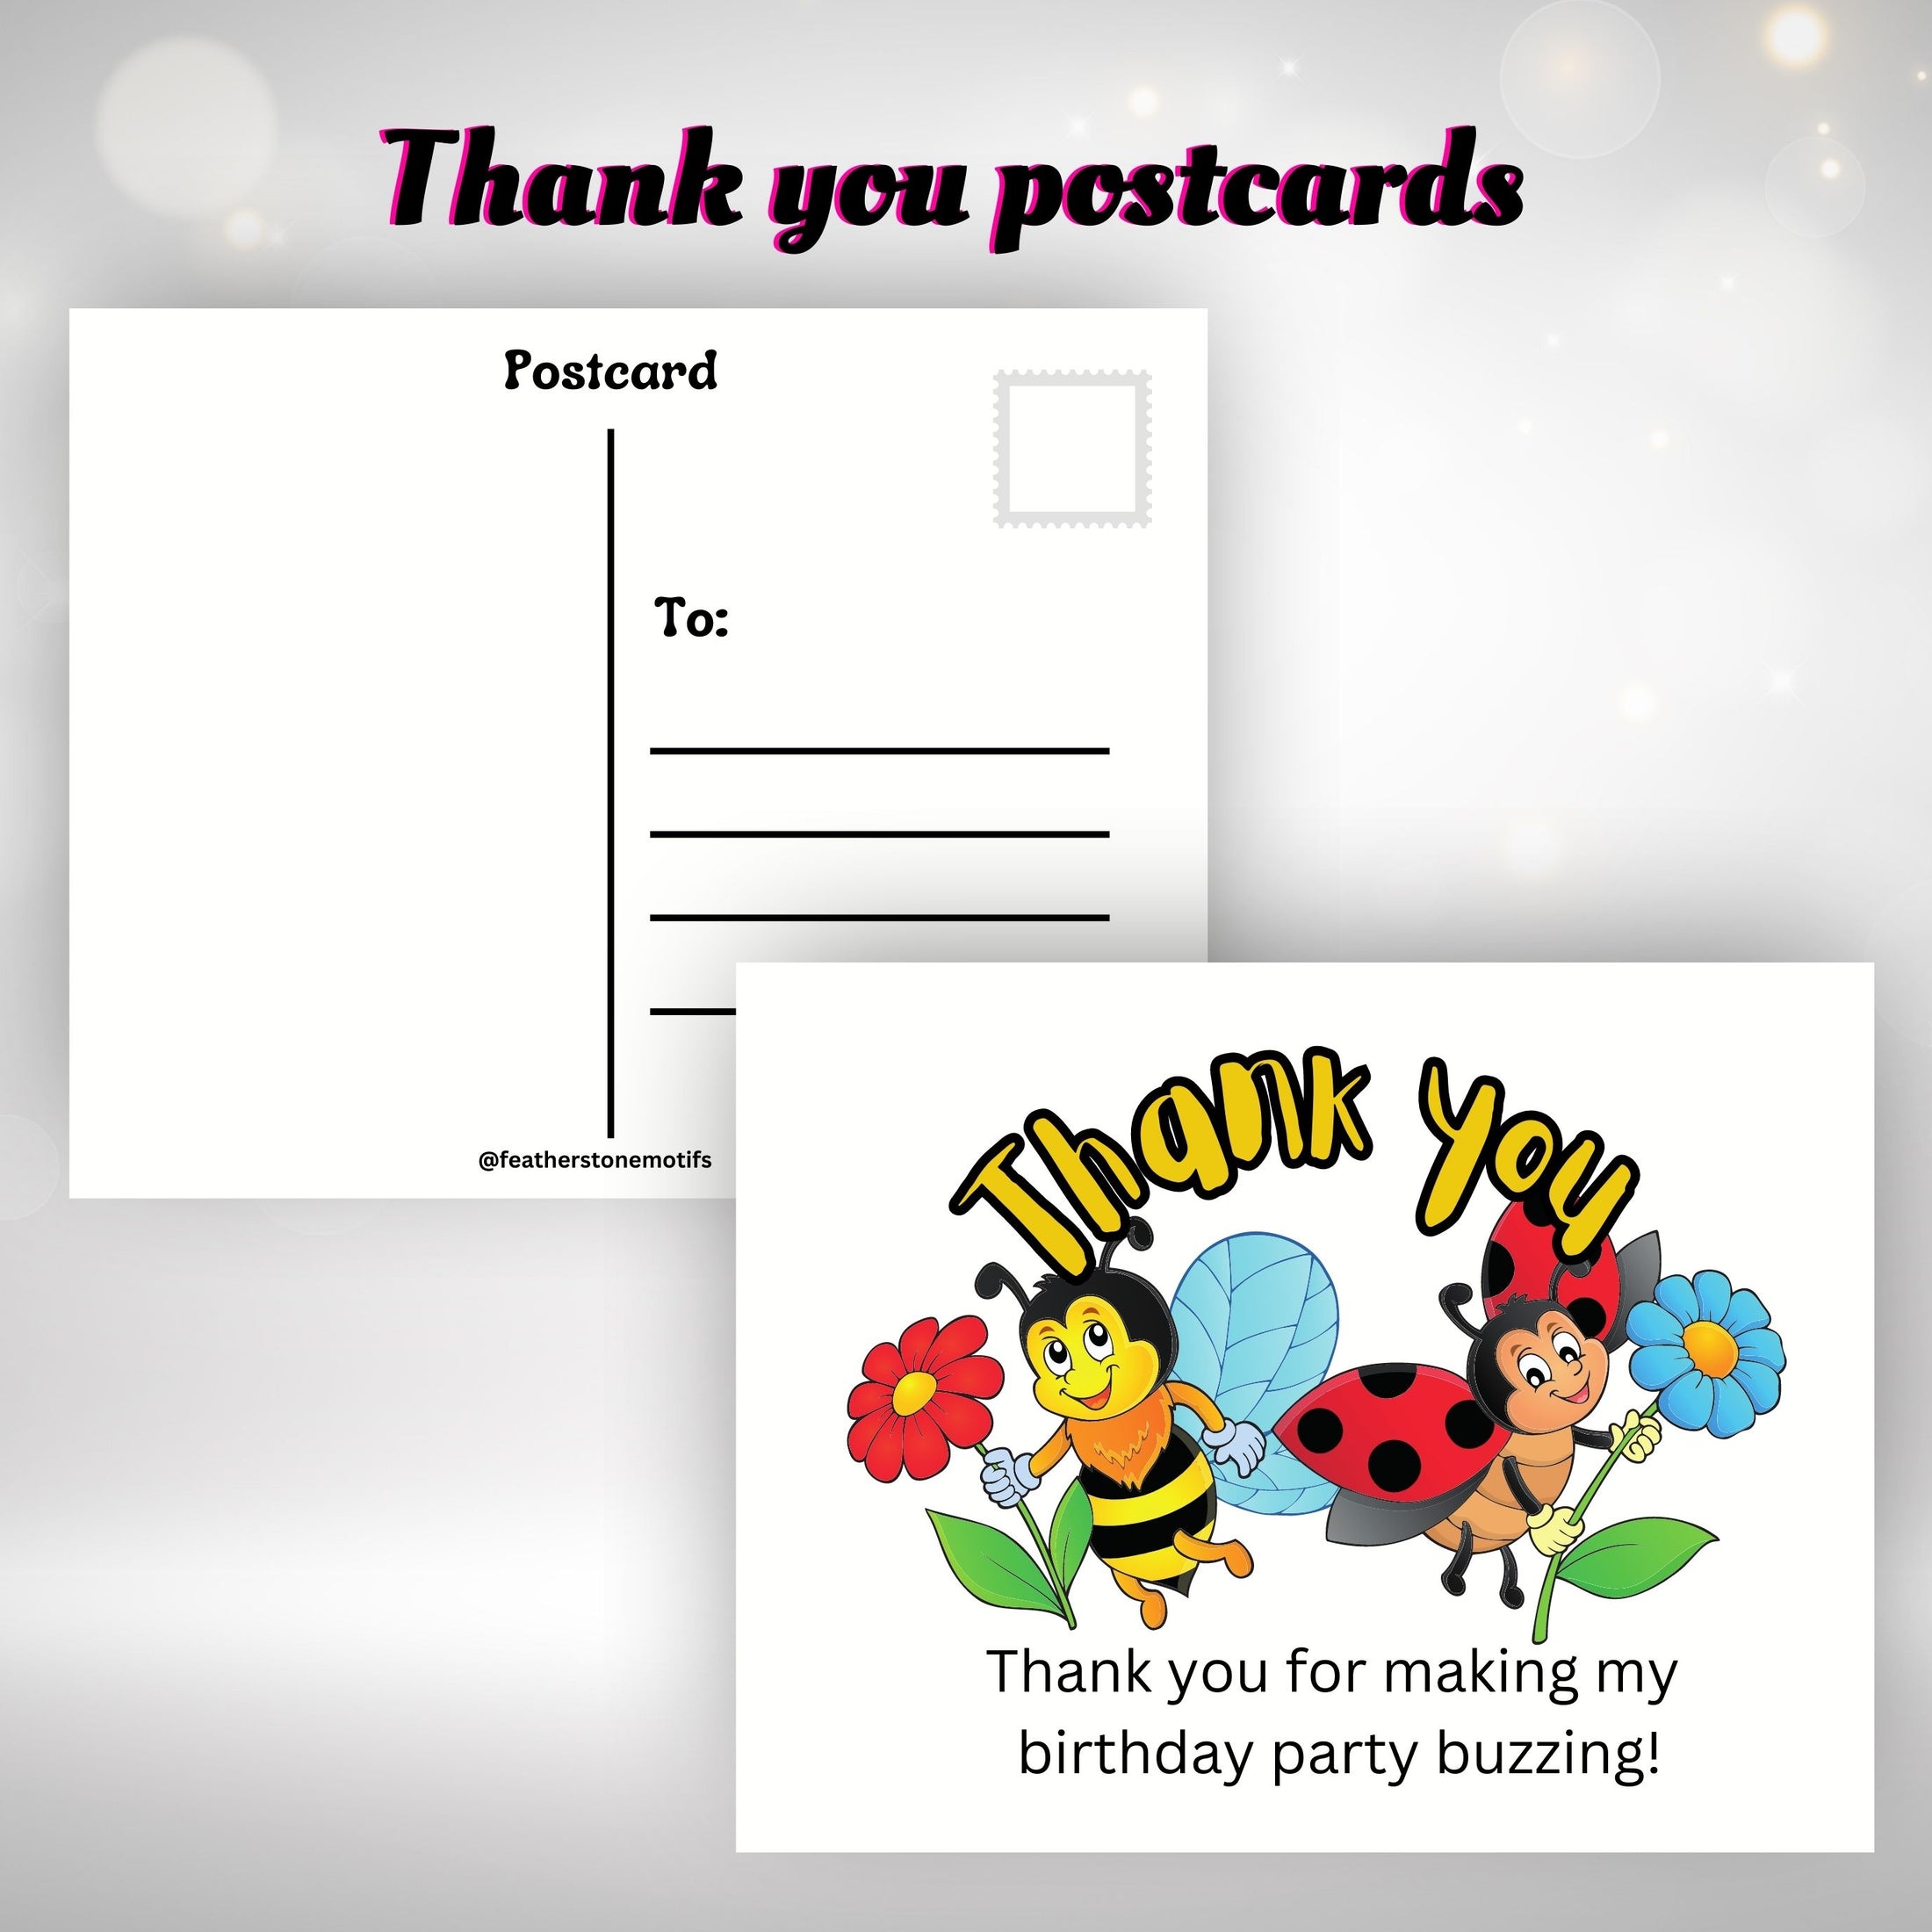 This image shows the front and back of the thank you postcards.